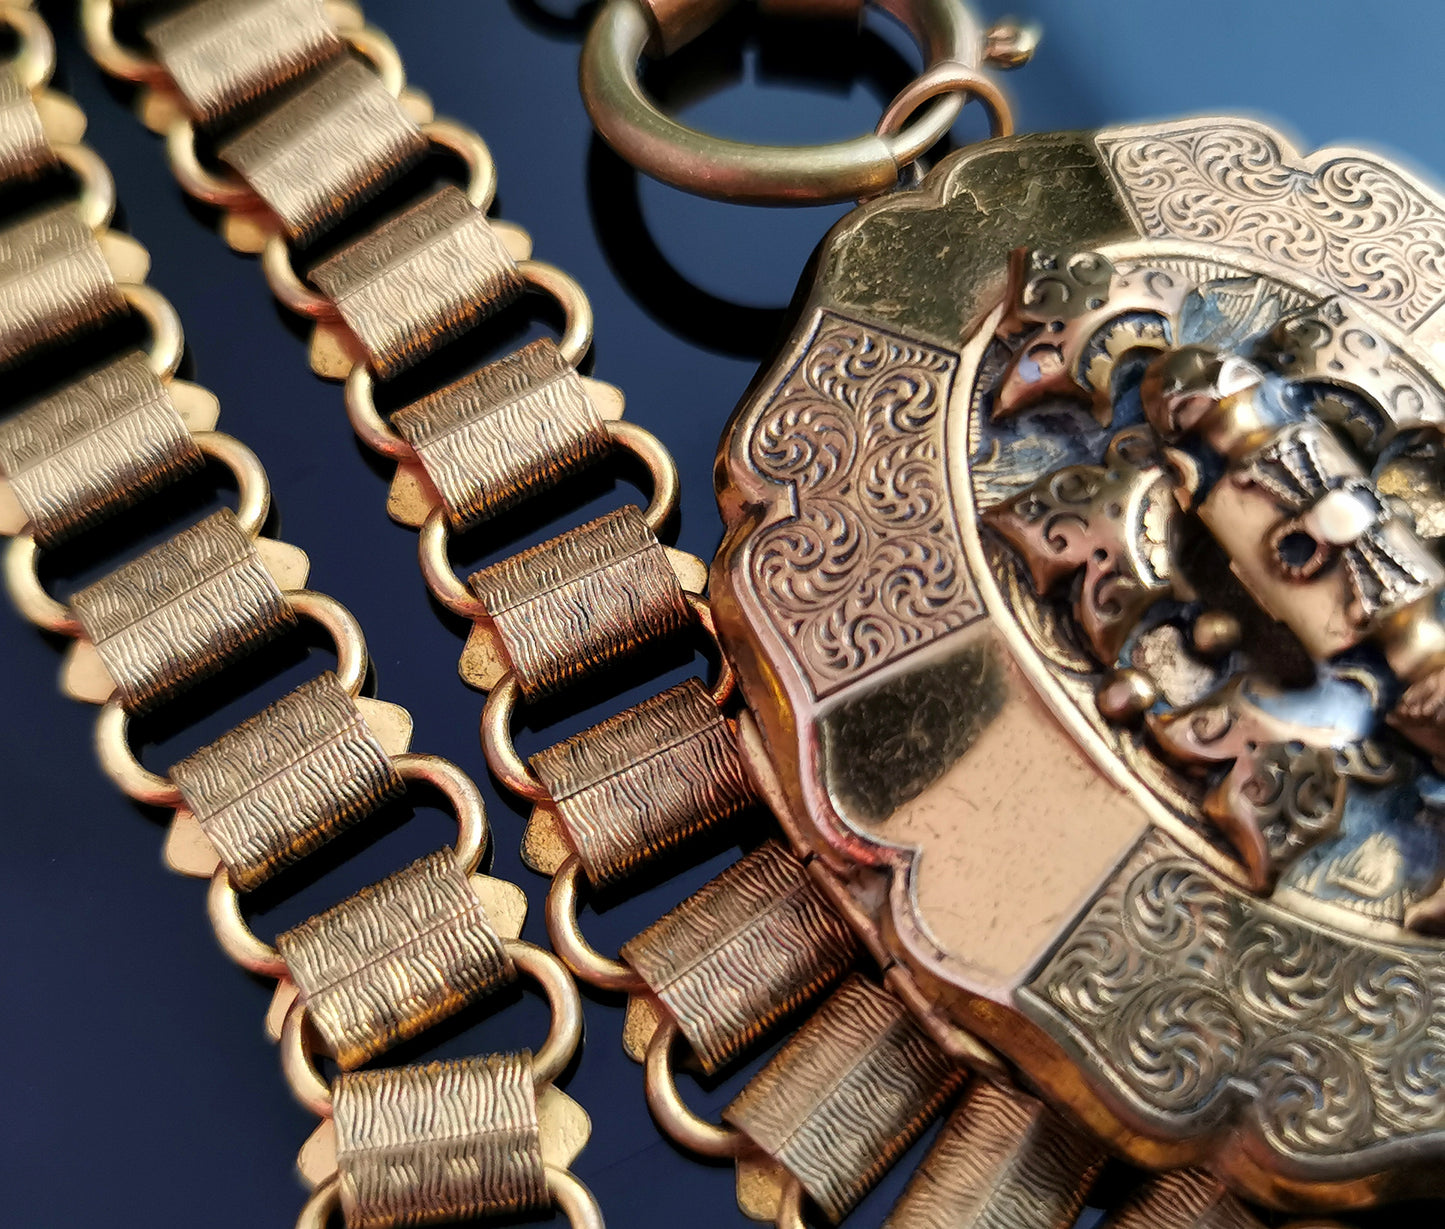 Victorian gilt locket and book chain necklace